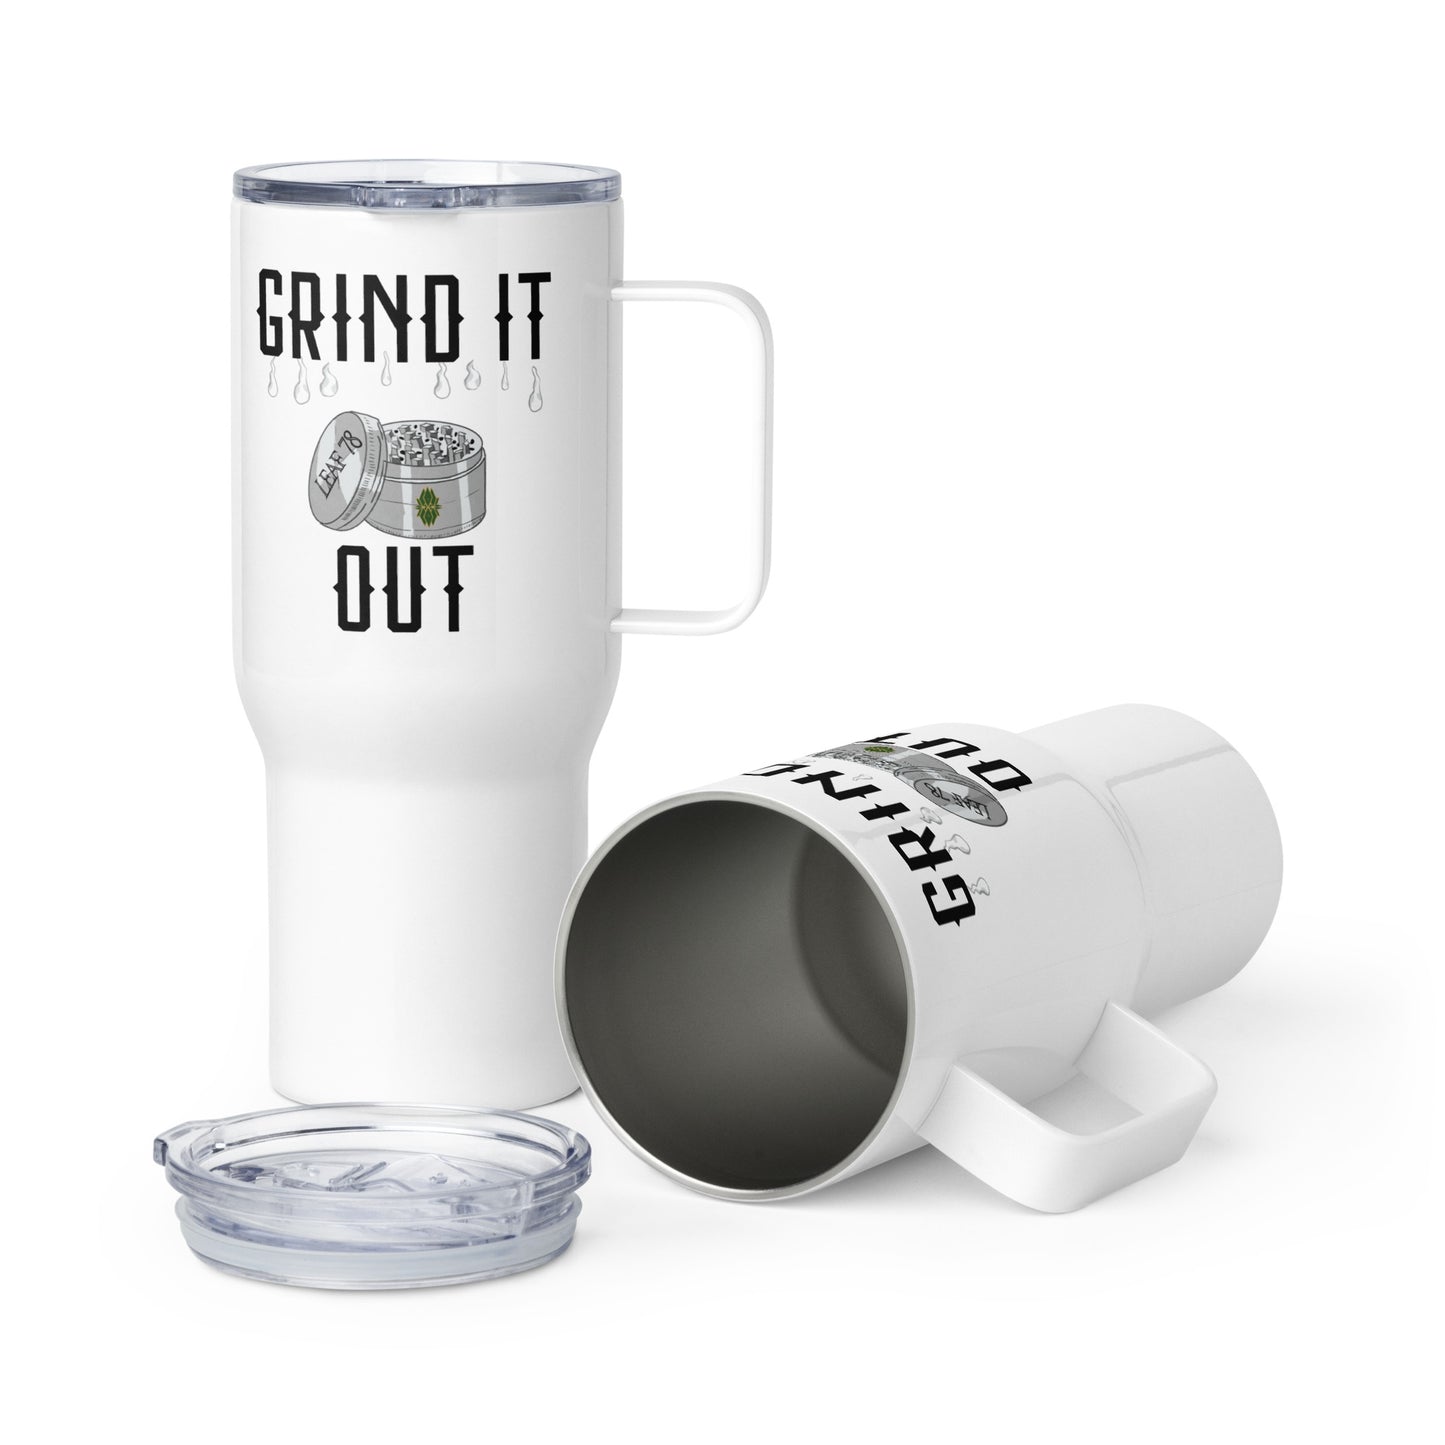 Grind It Out Travel mug with a handle